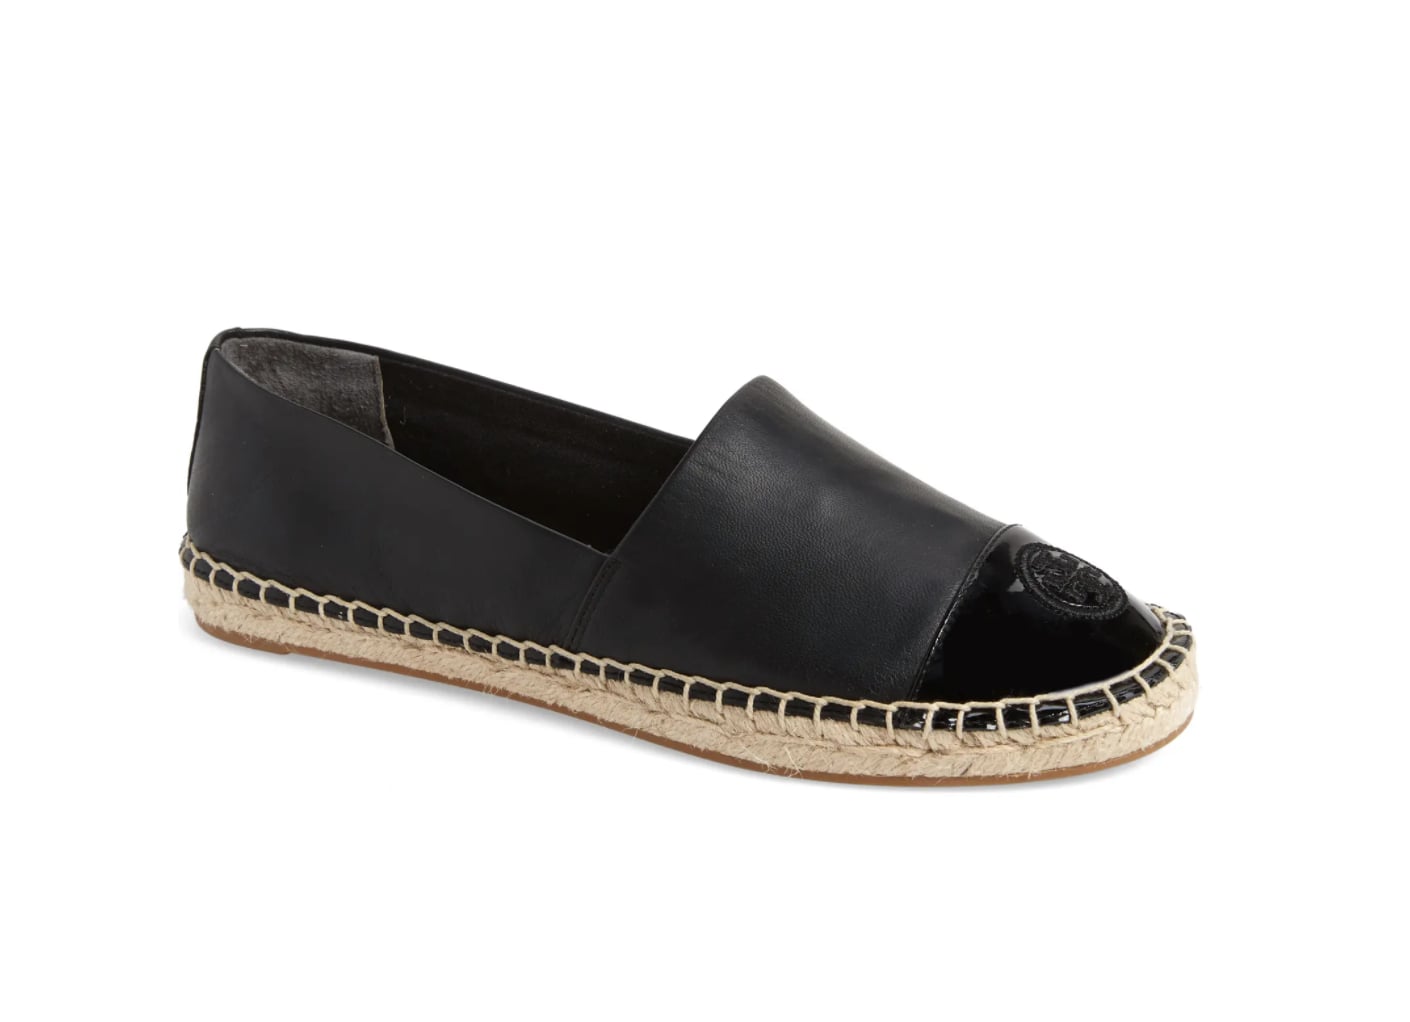 Tory Burch Colorblock Espadrille Flat | 15 Easy-to-Style Espadrilles You'll  Want to Wear All Summer Long | POPSUGAR Fashion Photo 14